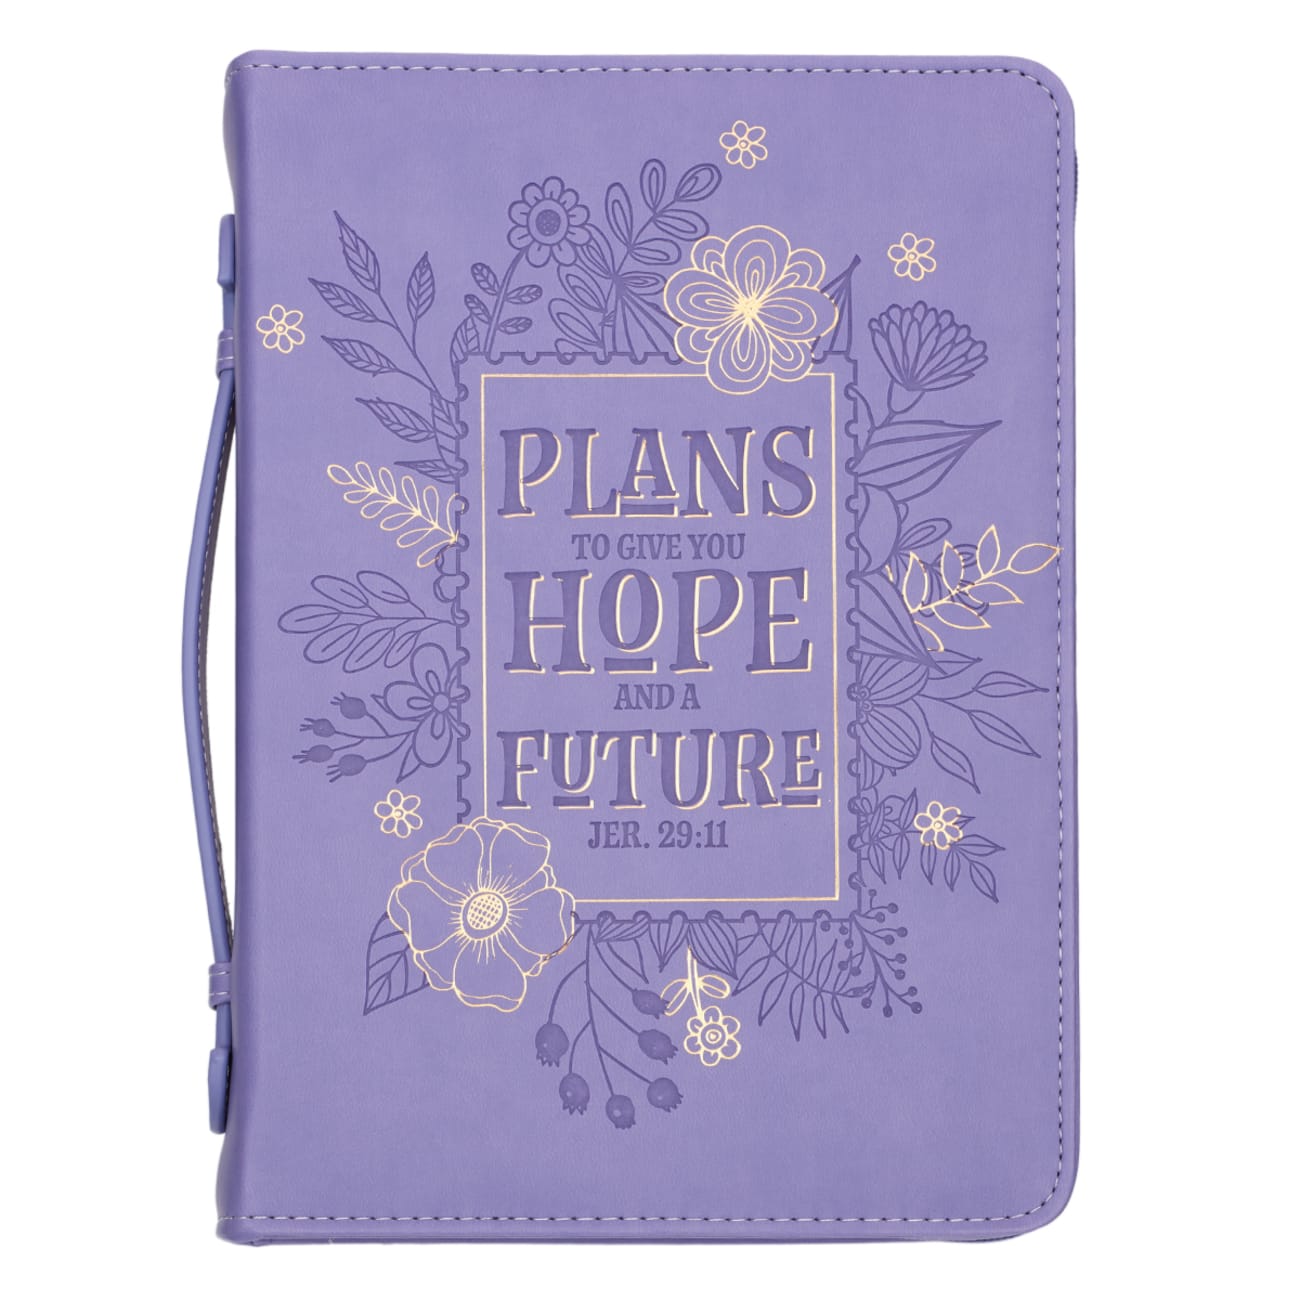 Bible Cover Trendy Medium Plans to Give You Hope and a Future, Purple Floral Luxleather (Jer 29: 11) Bible Cover